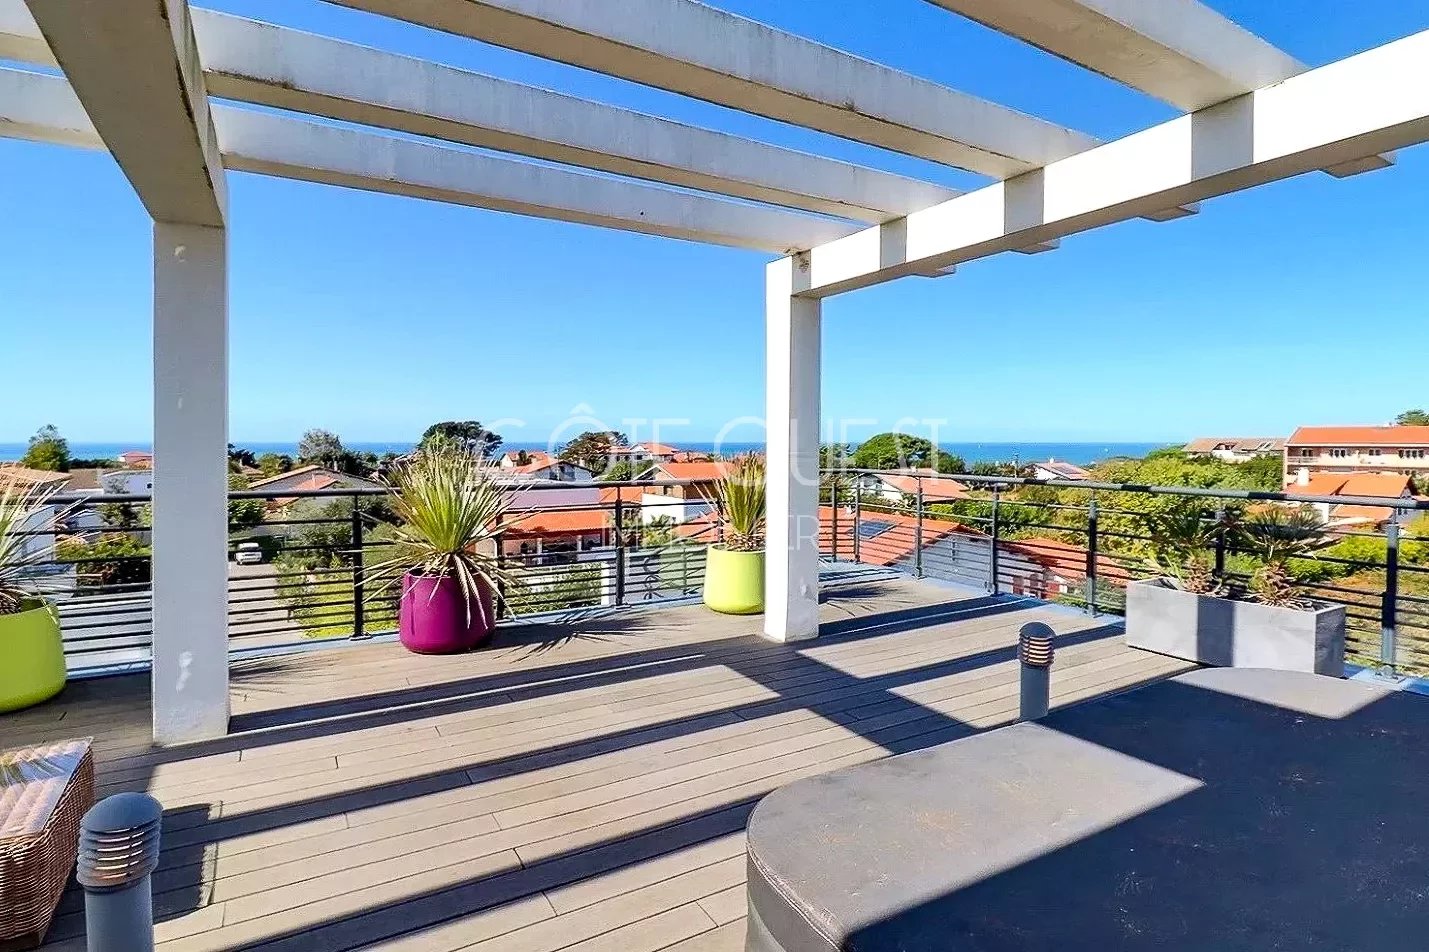 ANGLET CHAMBRE D’AMOUR NEIGHBOURHOOD. A LUXURIOUS APARTMENT WITH A ROOFTOP TERRACE ENJOYING A PANORAMIC OCEAN VIEW